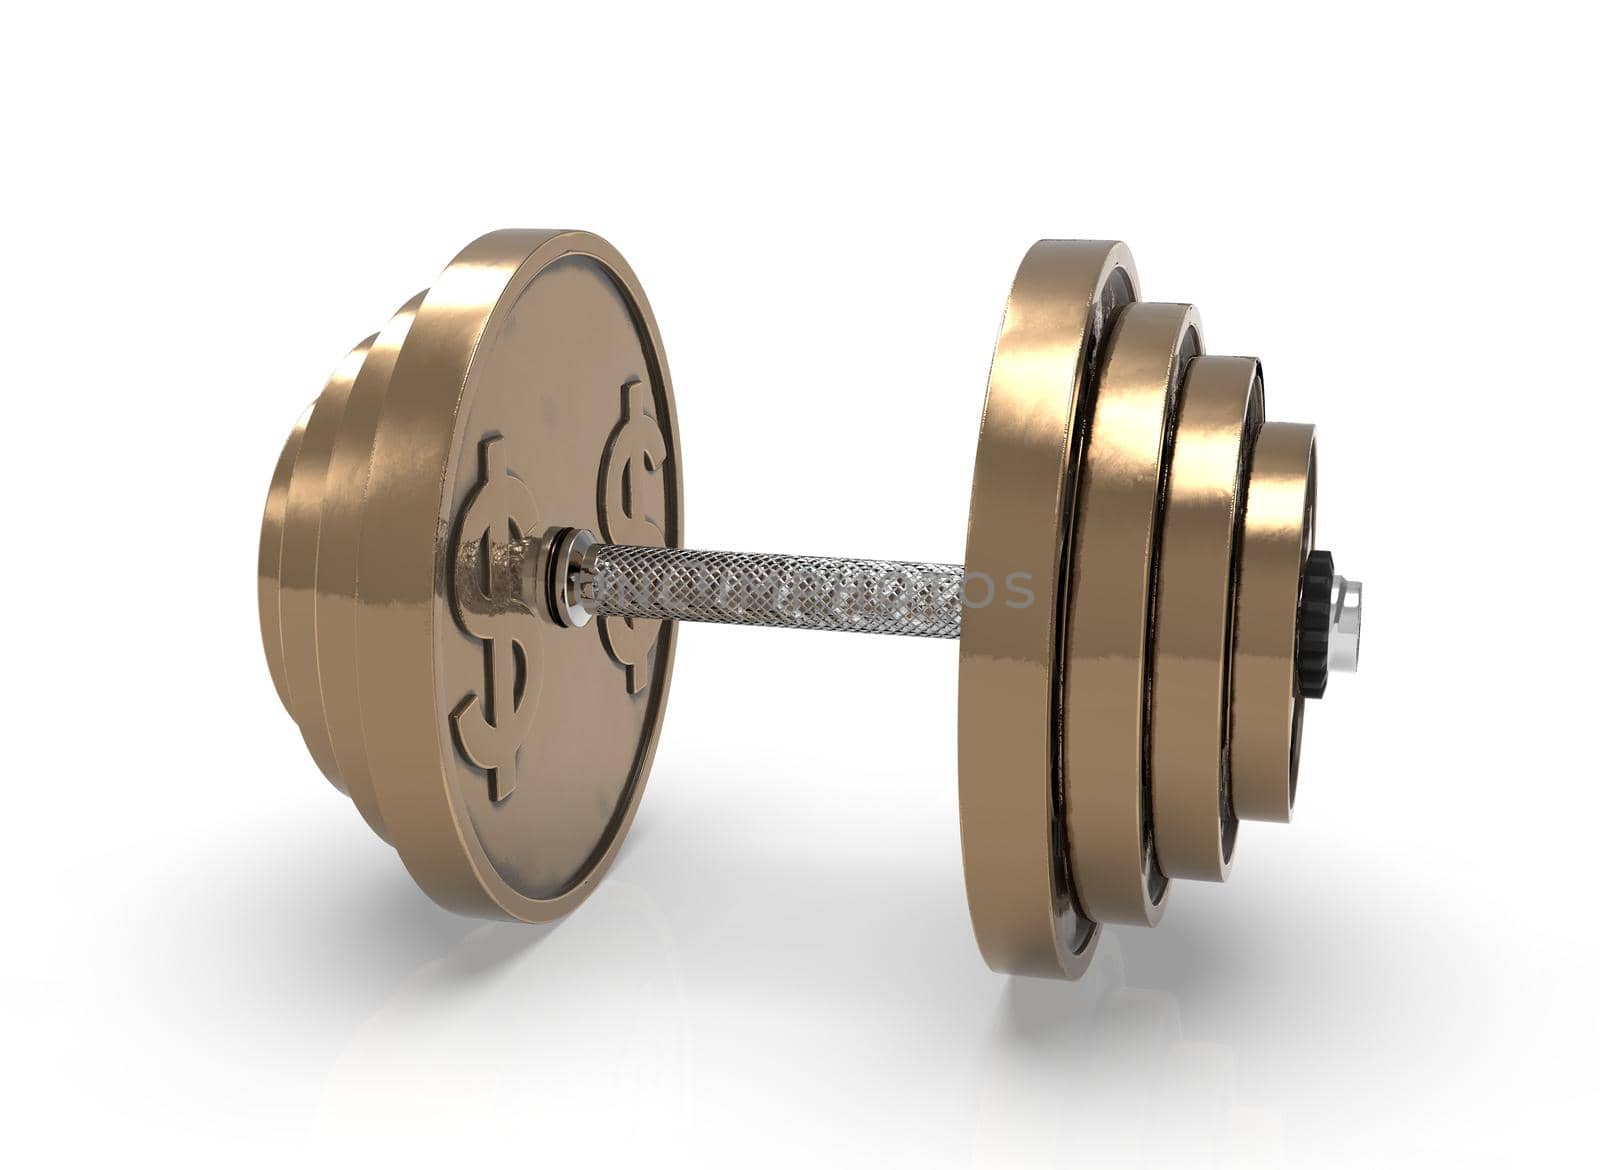 Bronze dumbbell made of a dollar coin on a white background 3d-rendering.